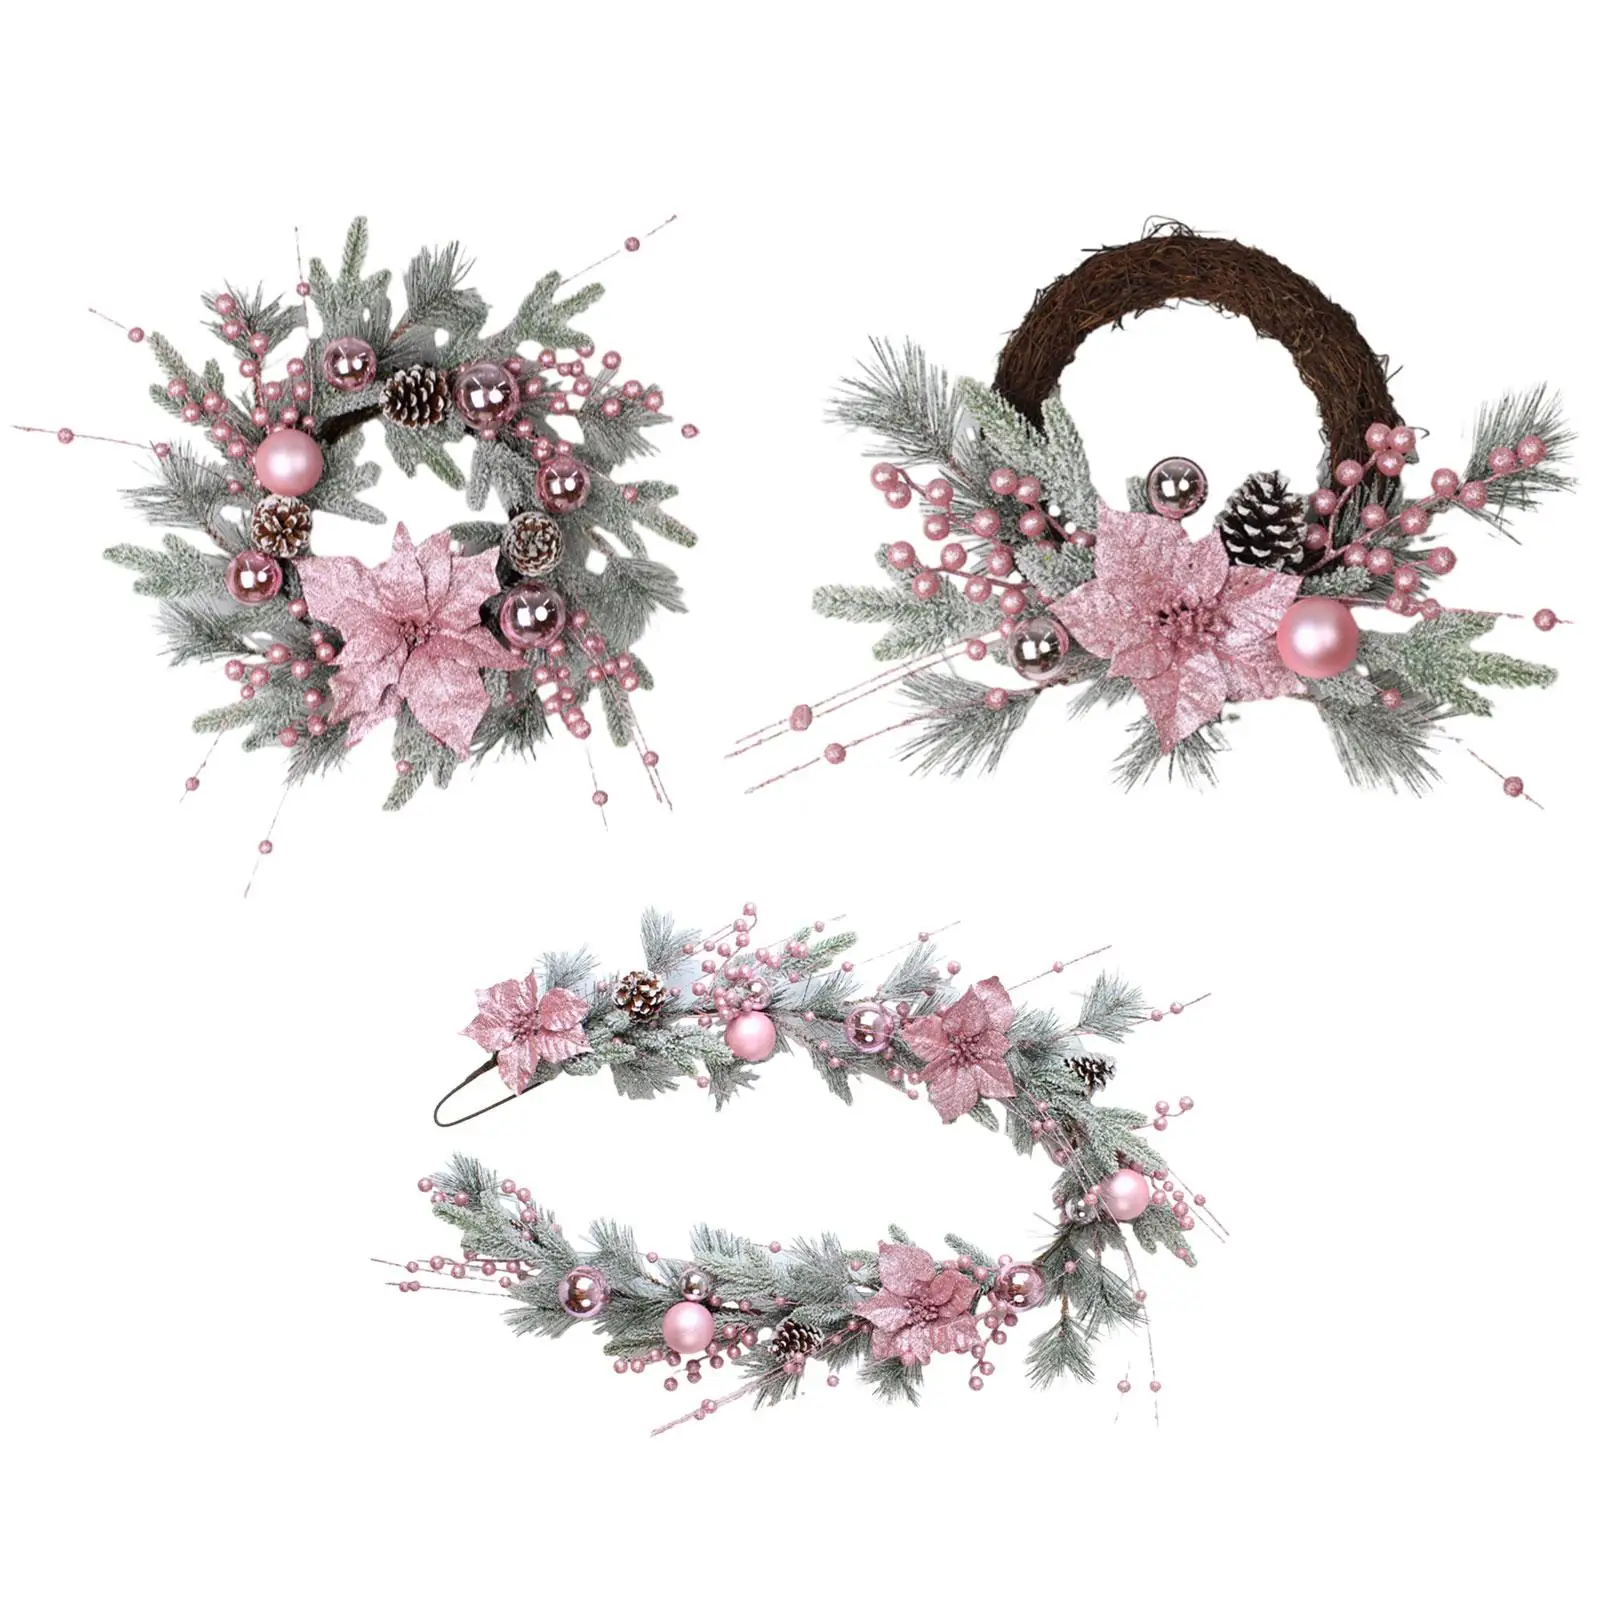 Christmas Wreath Holiday Garland Decoration for Wedding Office Living Room